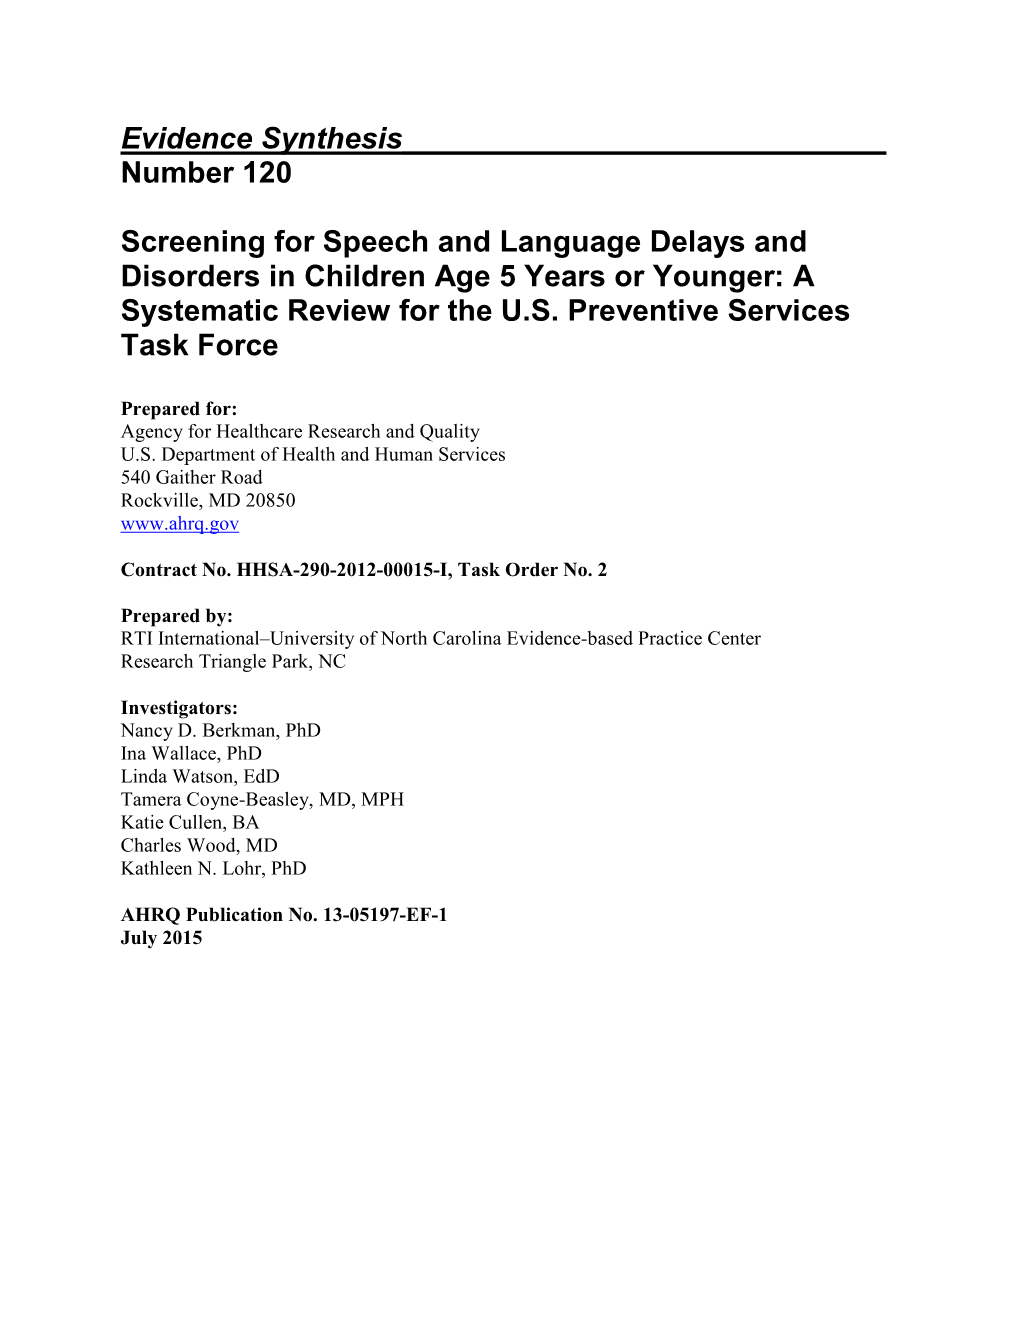 Screening for Speech and Language Delays and Disorders in Children Age 5 Years Or Younger: a Systematic Review for the U.S